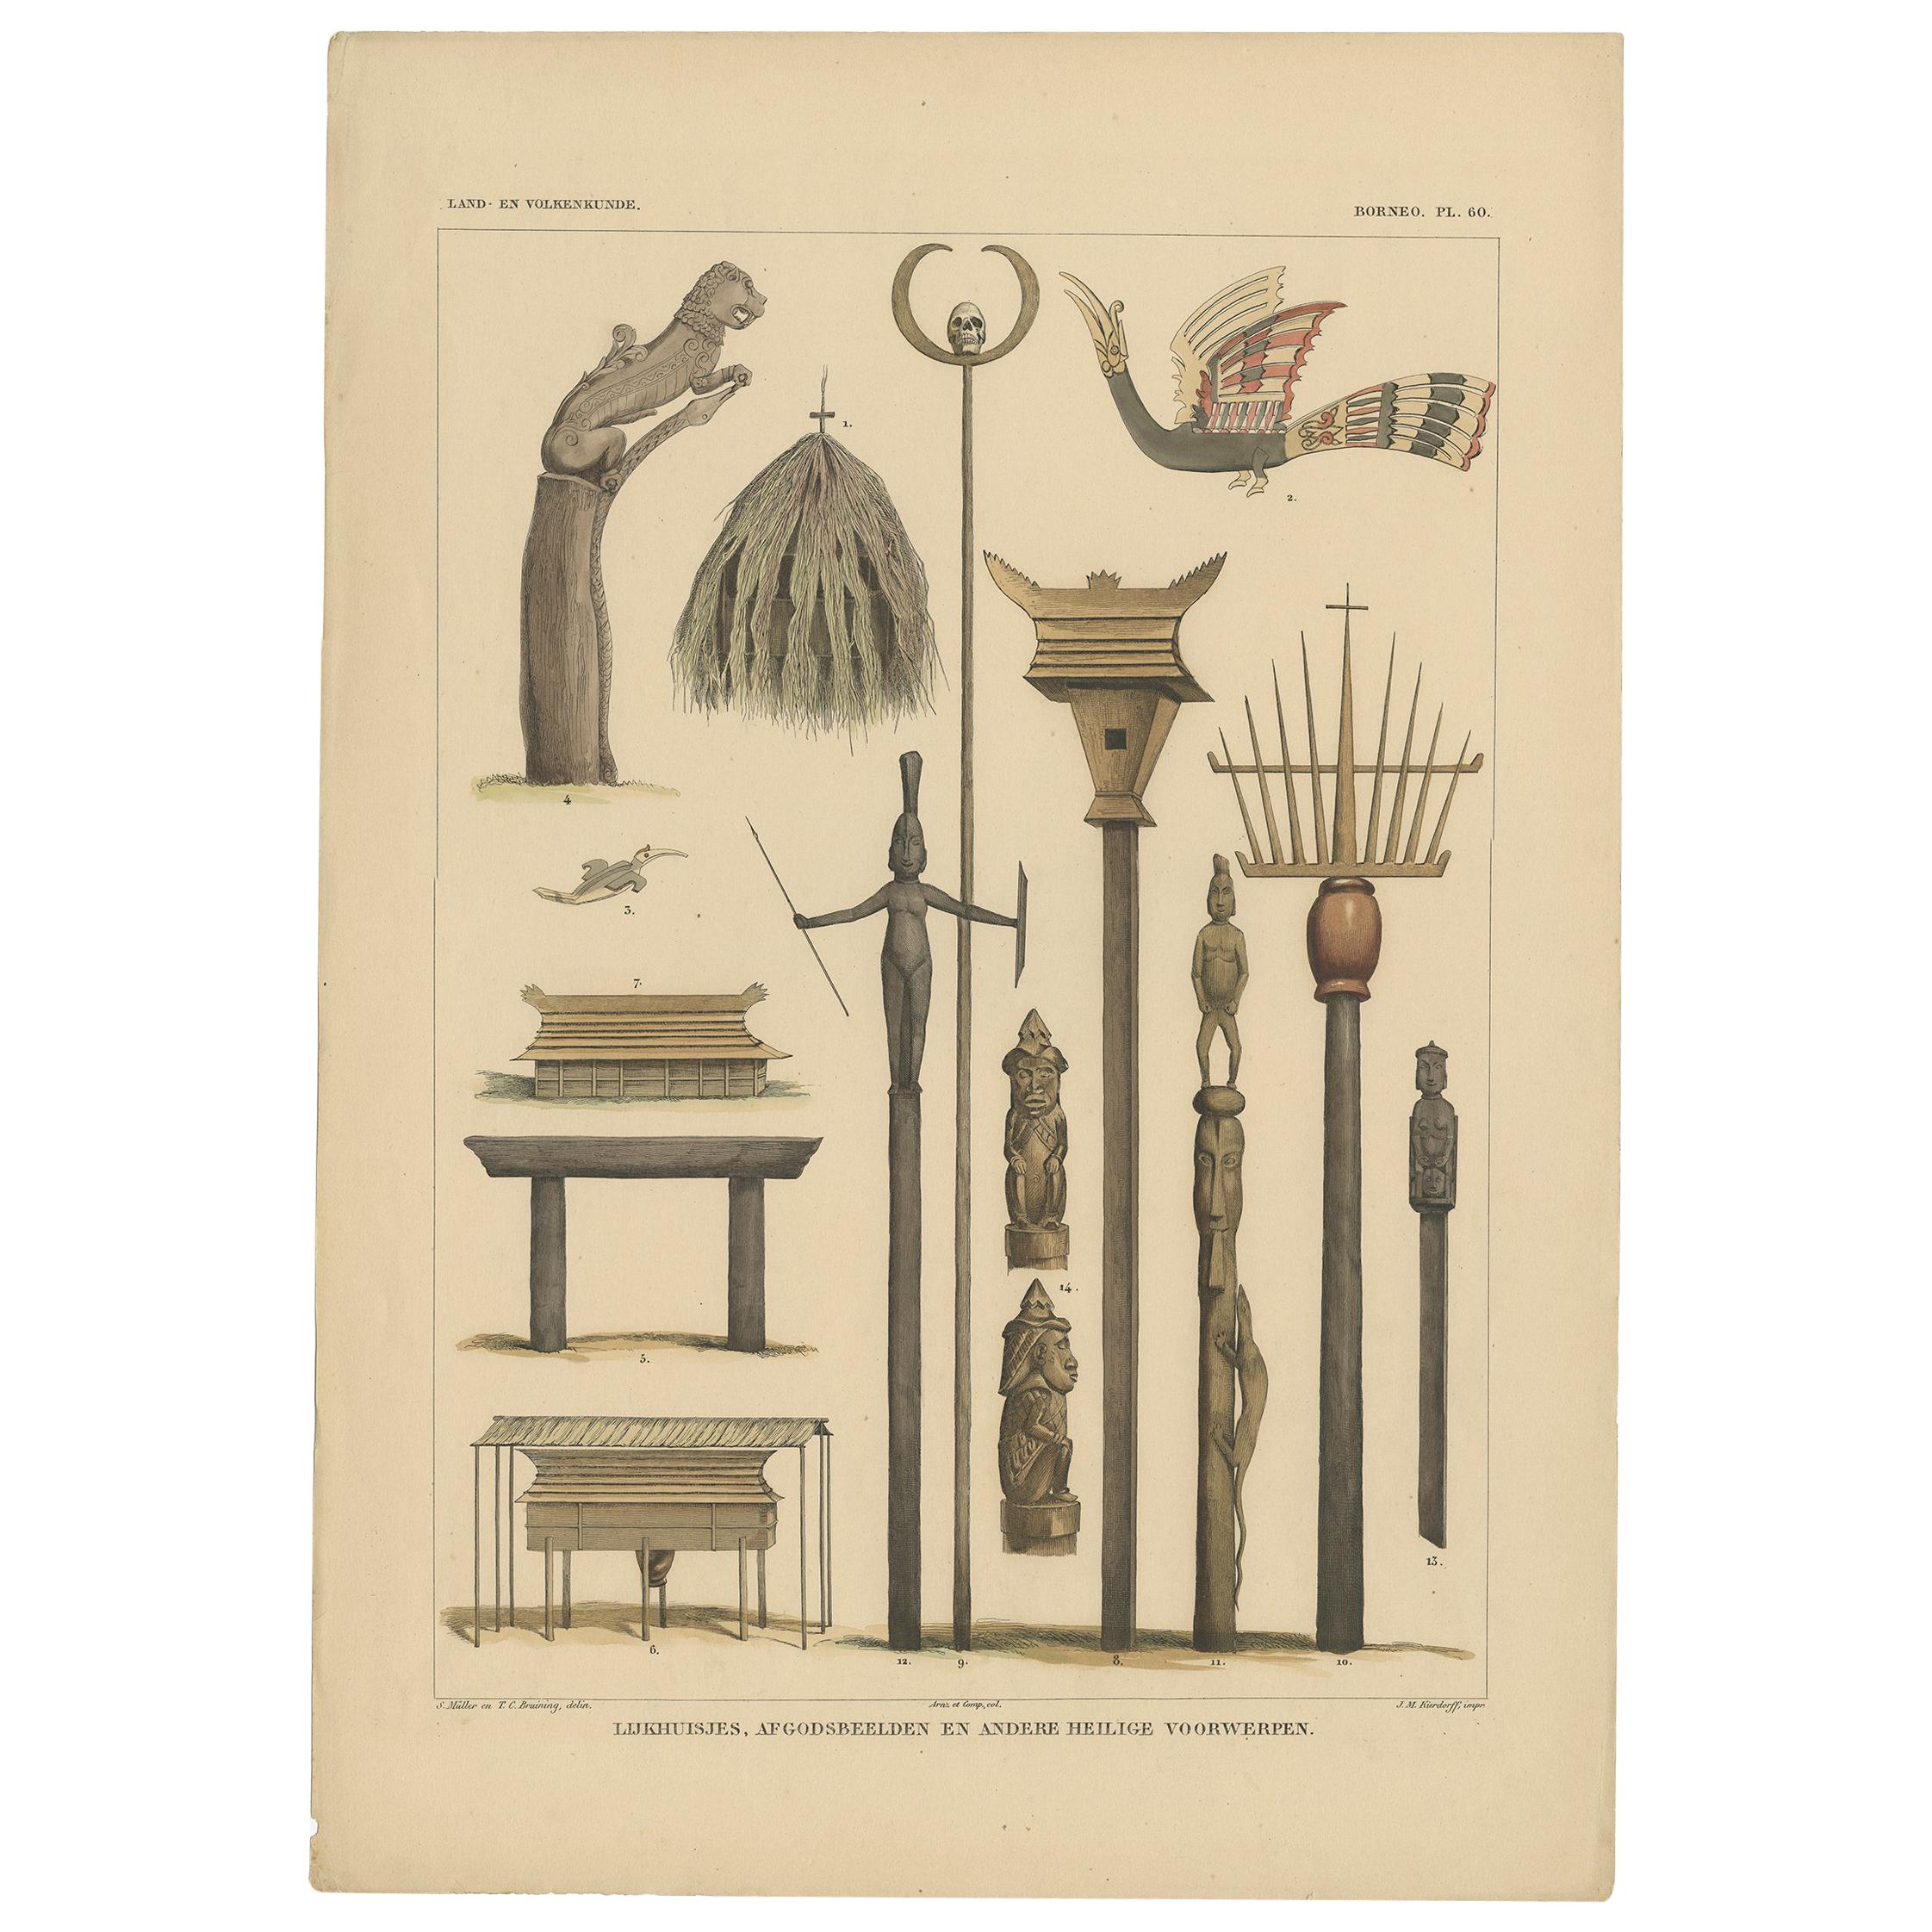 Print with Religious Items from Borneo 'Indonesia' by Temminck, circa 1840